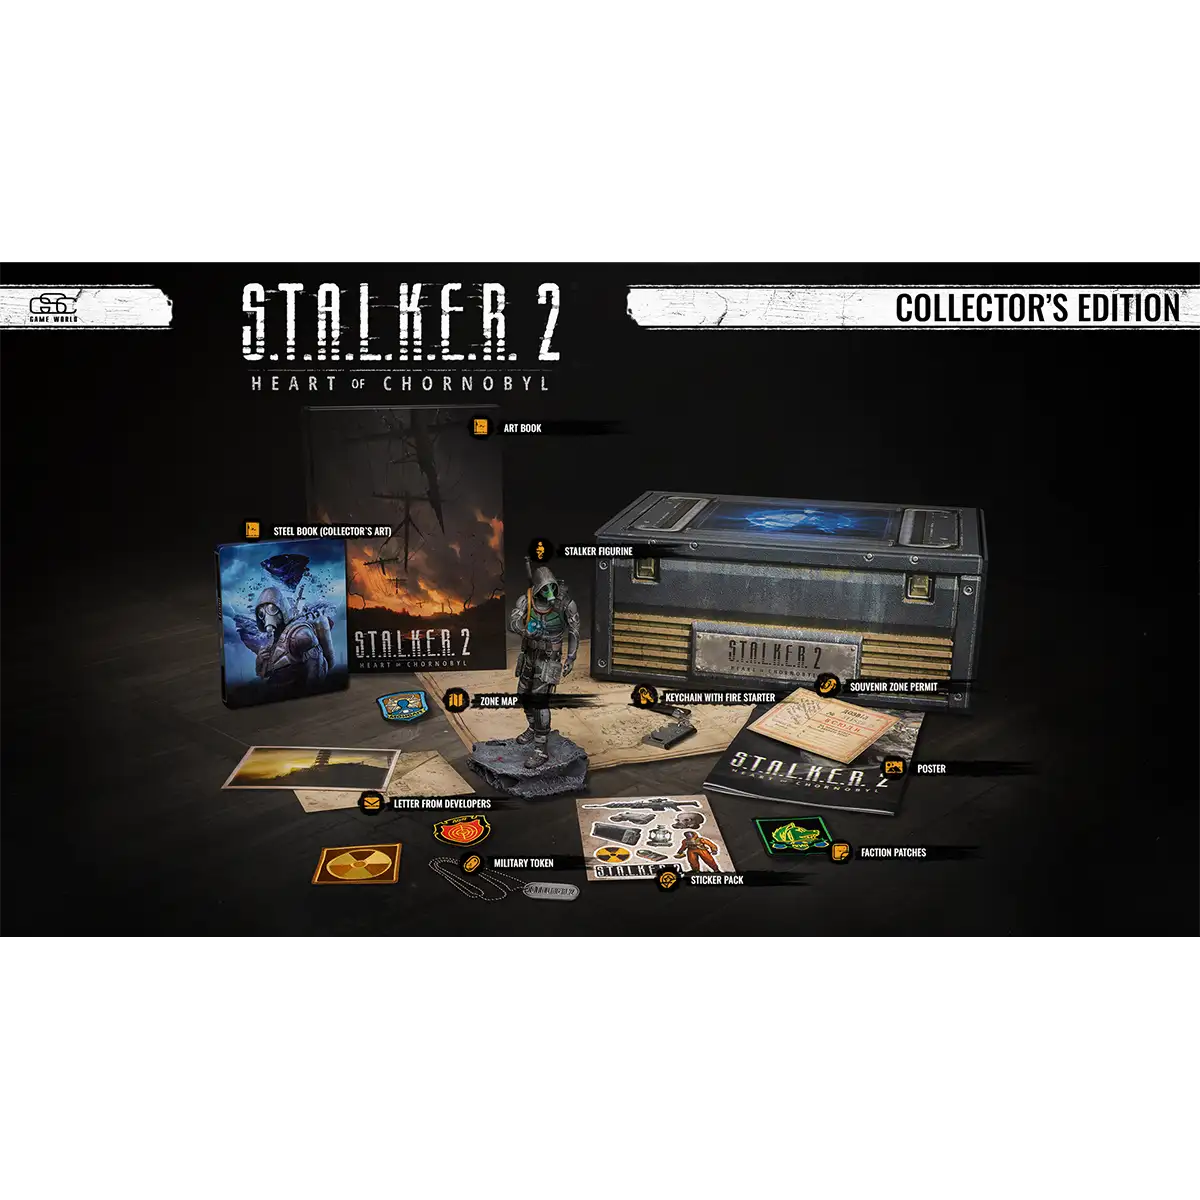 S.T.A.L.K.E.R. 2: Heart of Chornobyl Collector's Edition (XSRX) Image 2